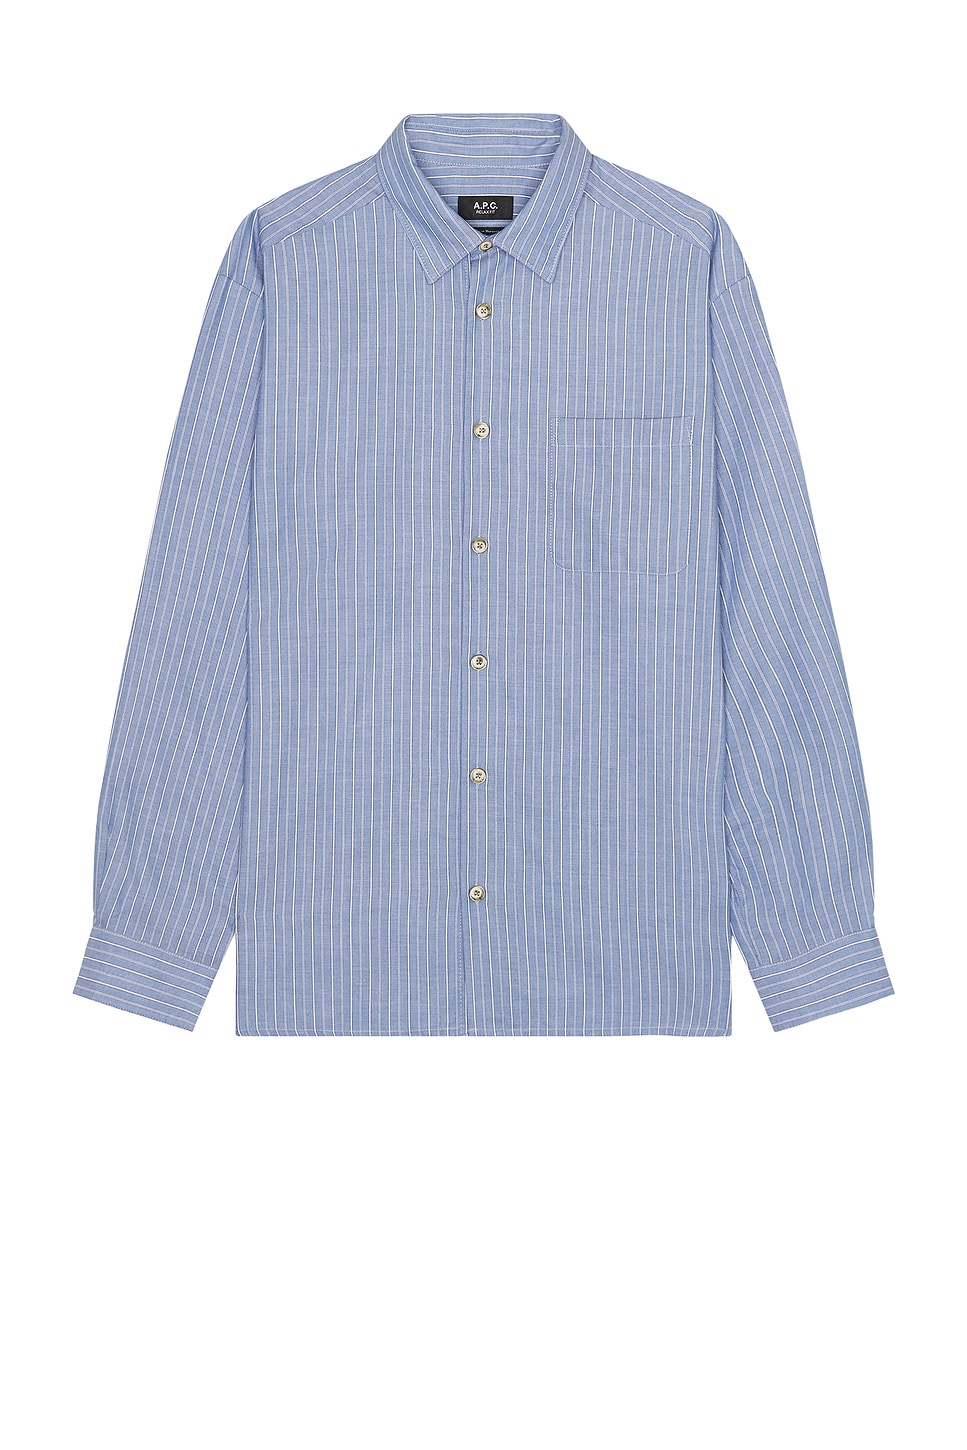 Image 1 of A.P.C. Malo Shirt in Blue